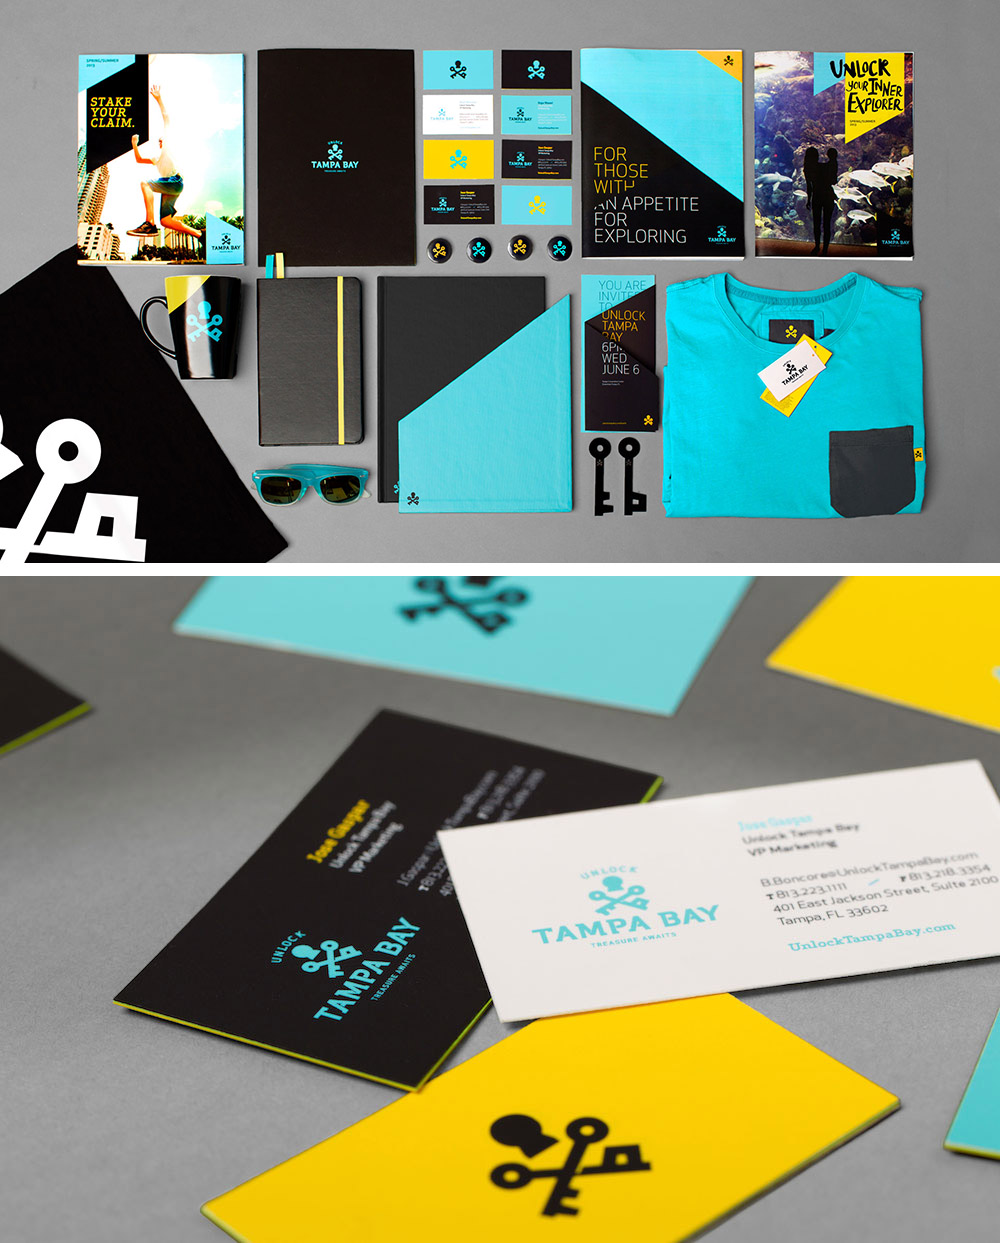 Unlock Tampa Bay Branding Campaign by SPARK